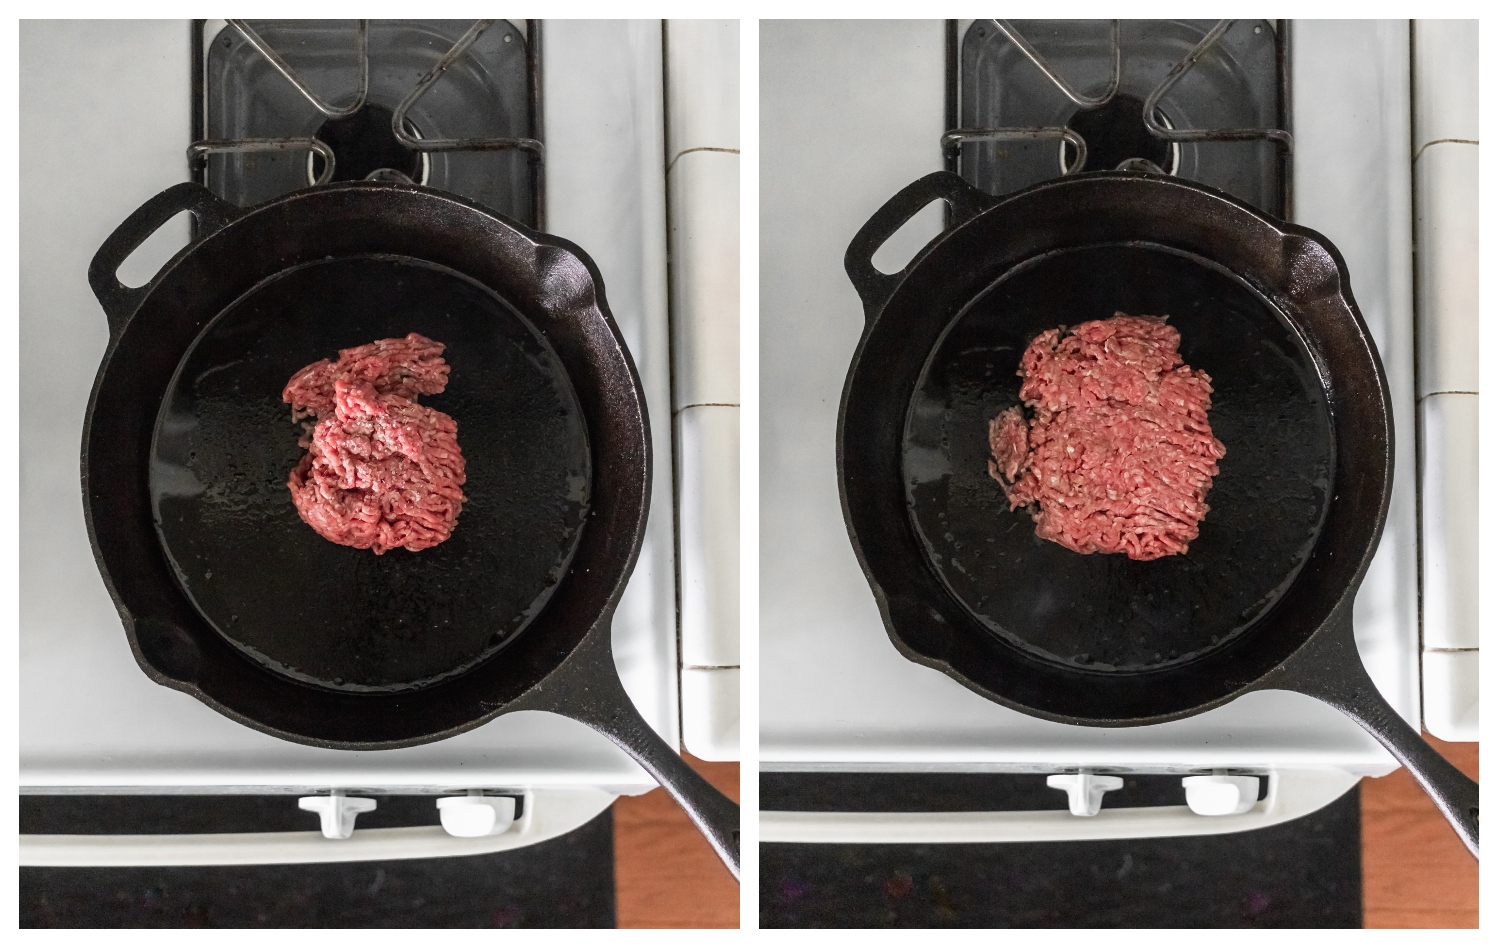 A bird's eye view of two photos of a cast iron skillet on a white stove. On the left, ground meat is in the pan in a ball, and on the right the meat is smashed into a patty.